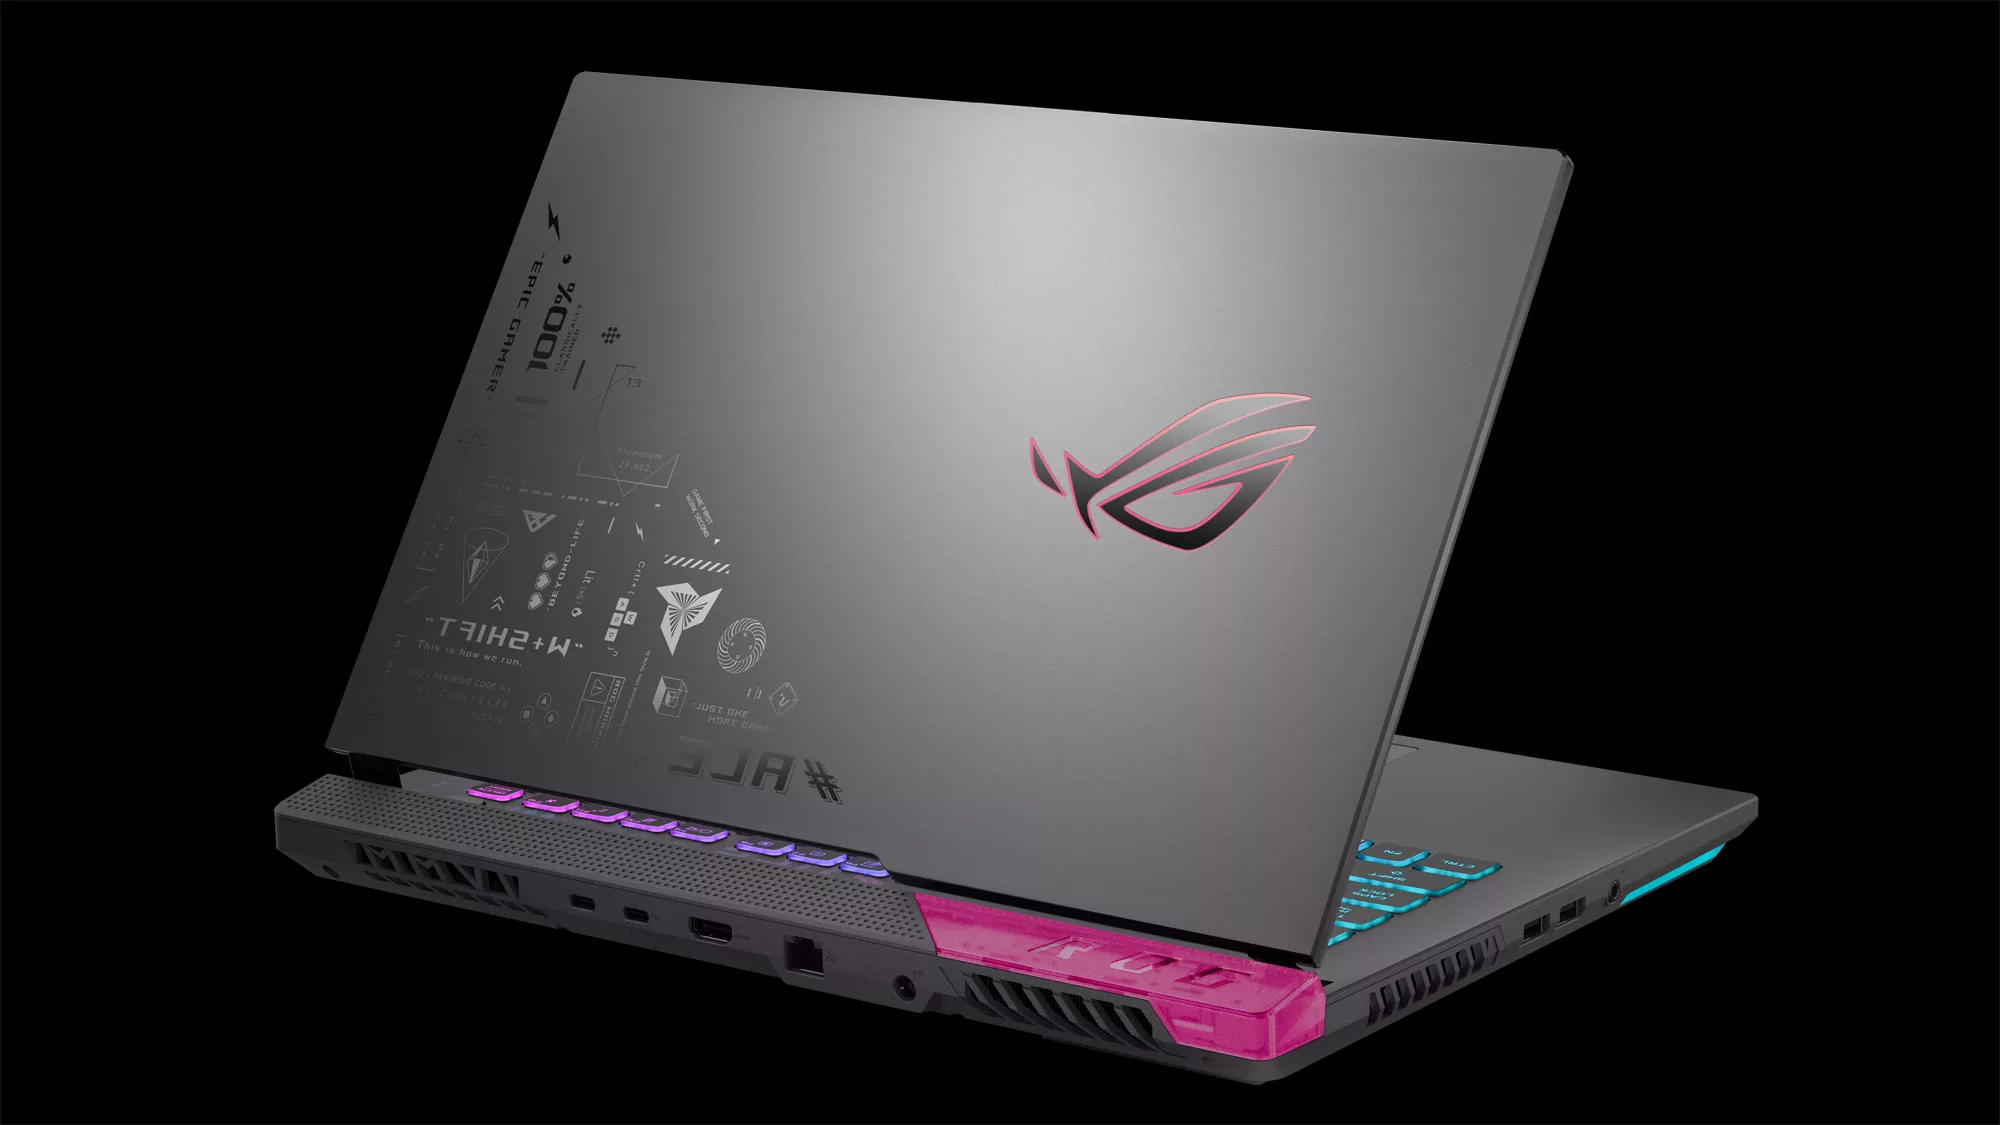 Rear view of pink accented Strix G, featuring cyberpunk accents on the laptop lid.